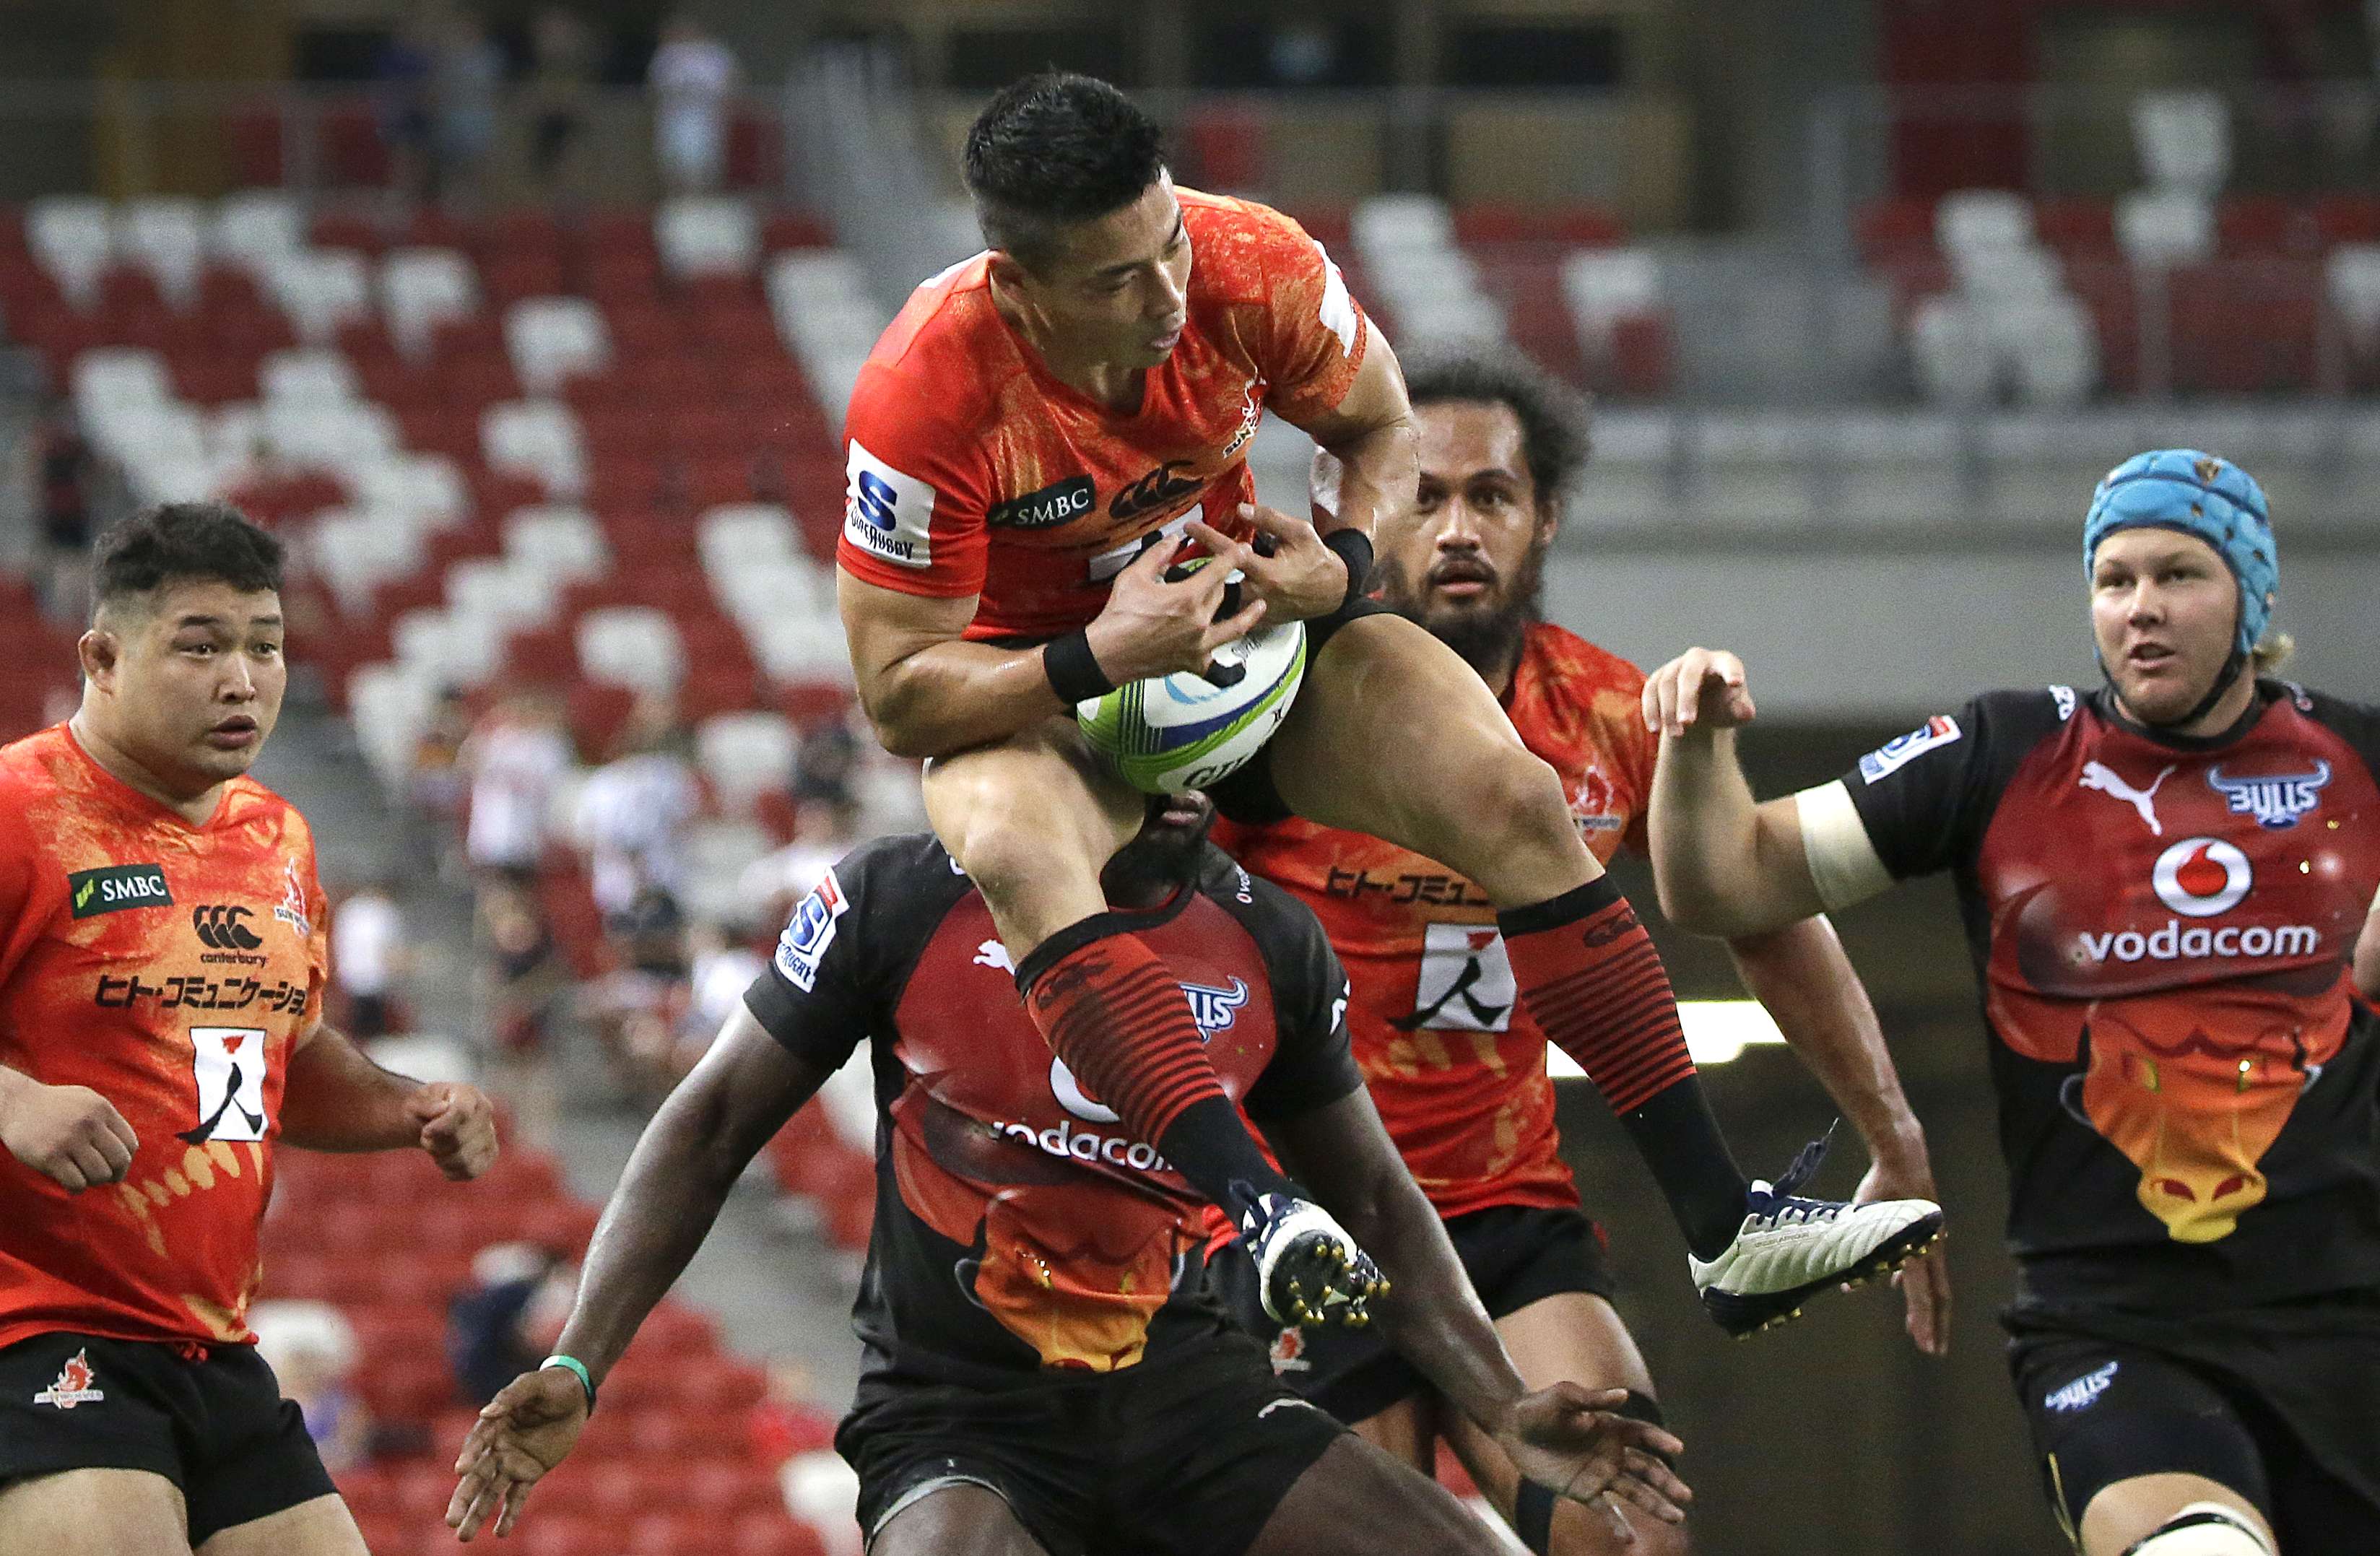 Yasutaka Sasakura of the Sunwolves catches the ball during their Super Rugby match against South Africa's Bulls in Singapore. The Bulls won 30-27. Photo: AP